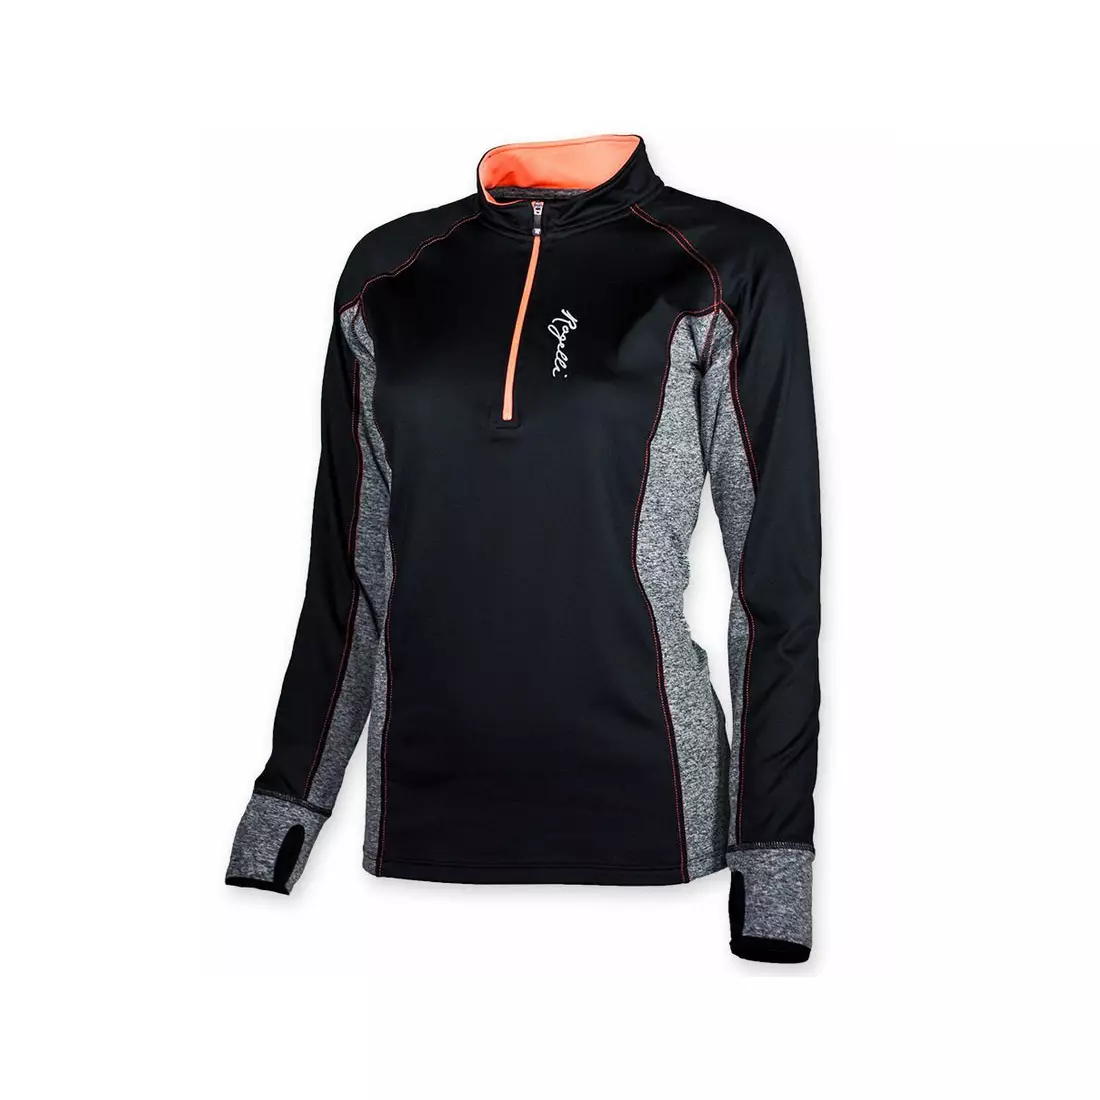 ROGELLI MAURA - women's insulated running sweatshirt 840.660, color: black and pink (coral)